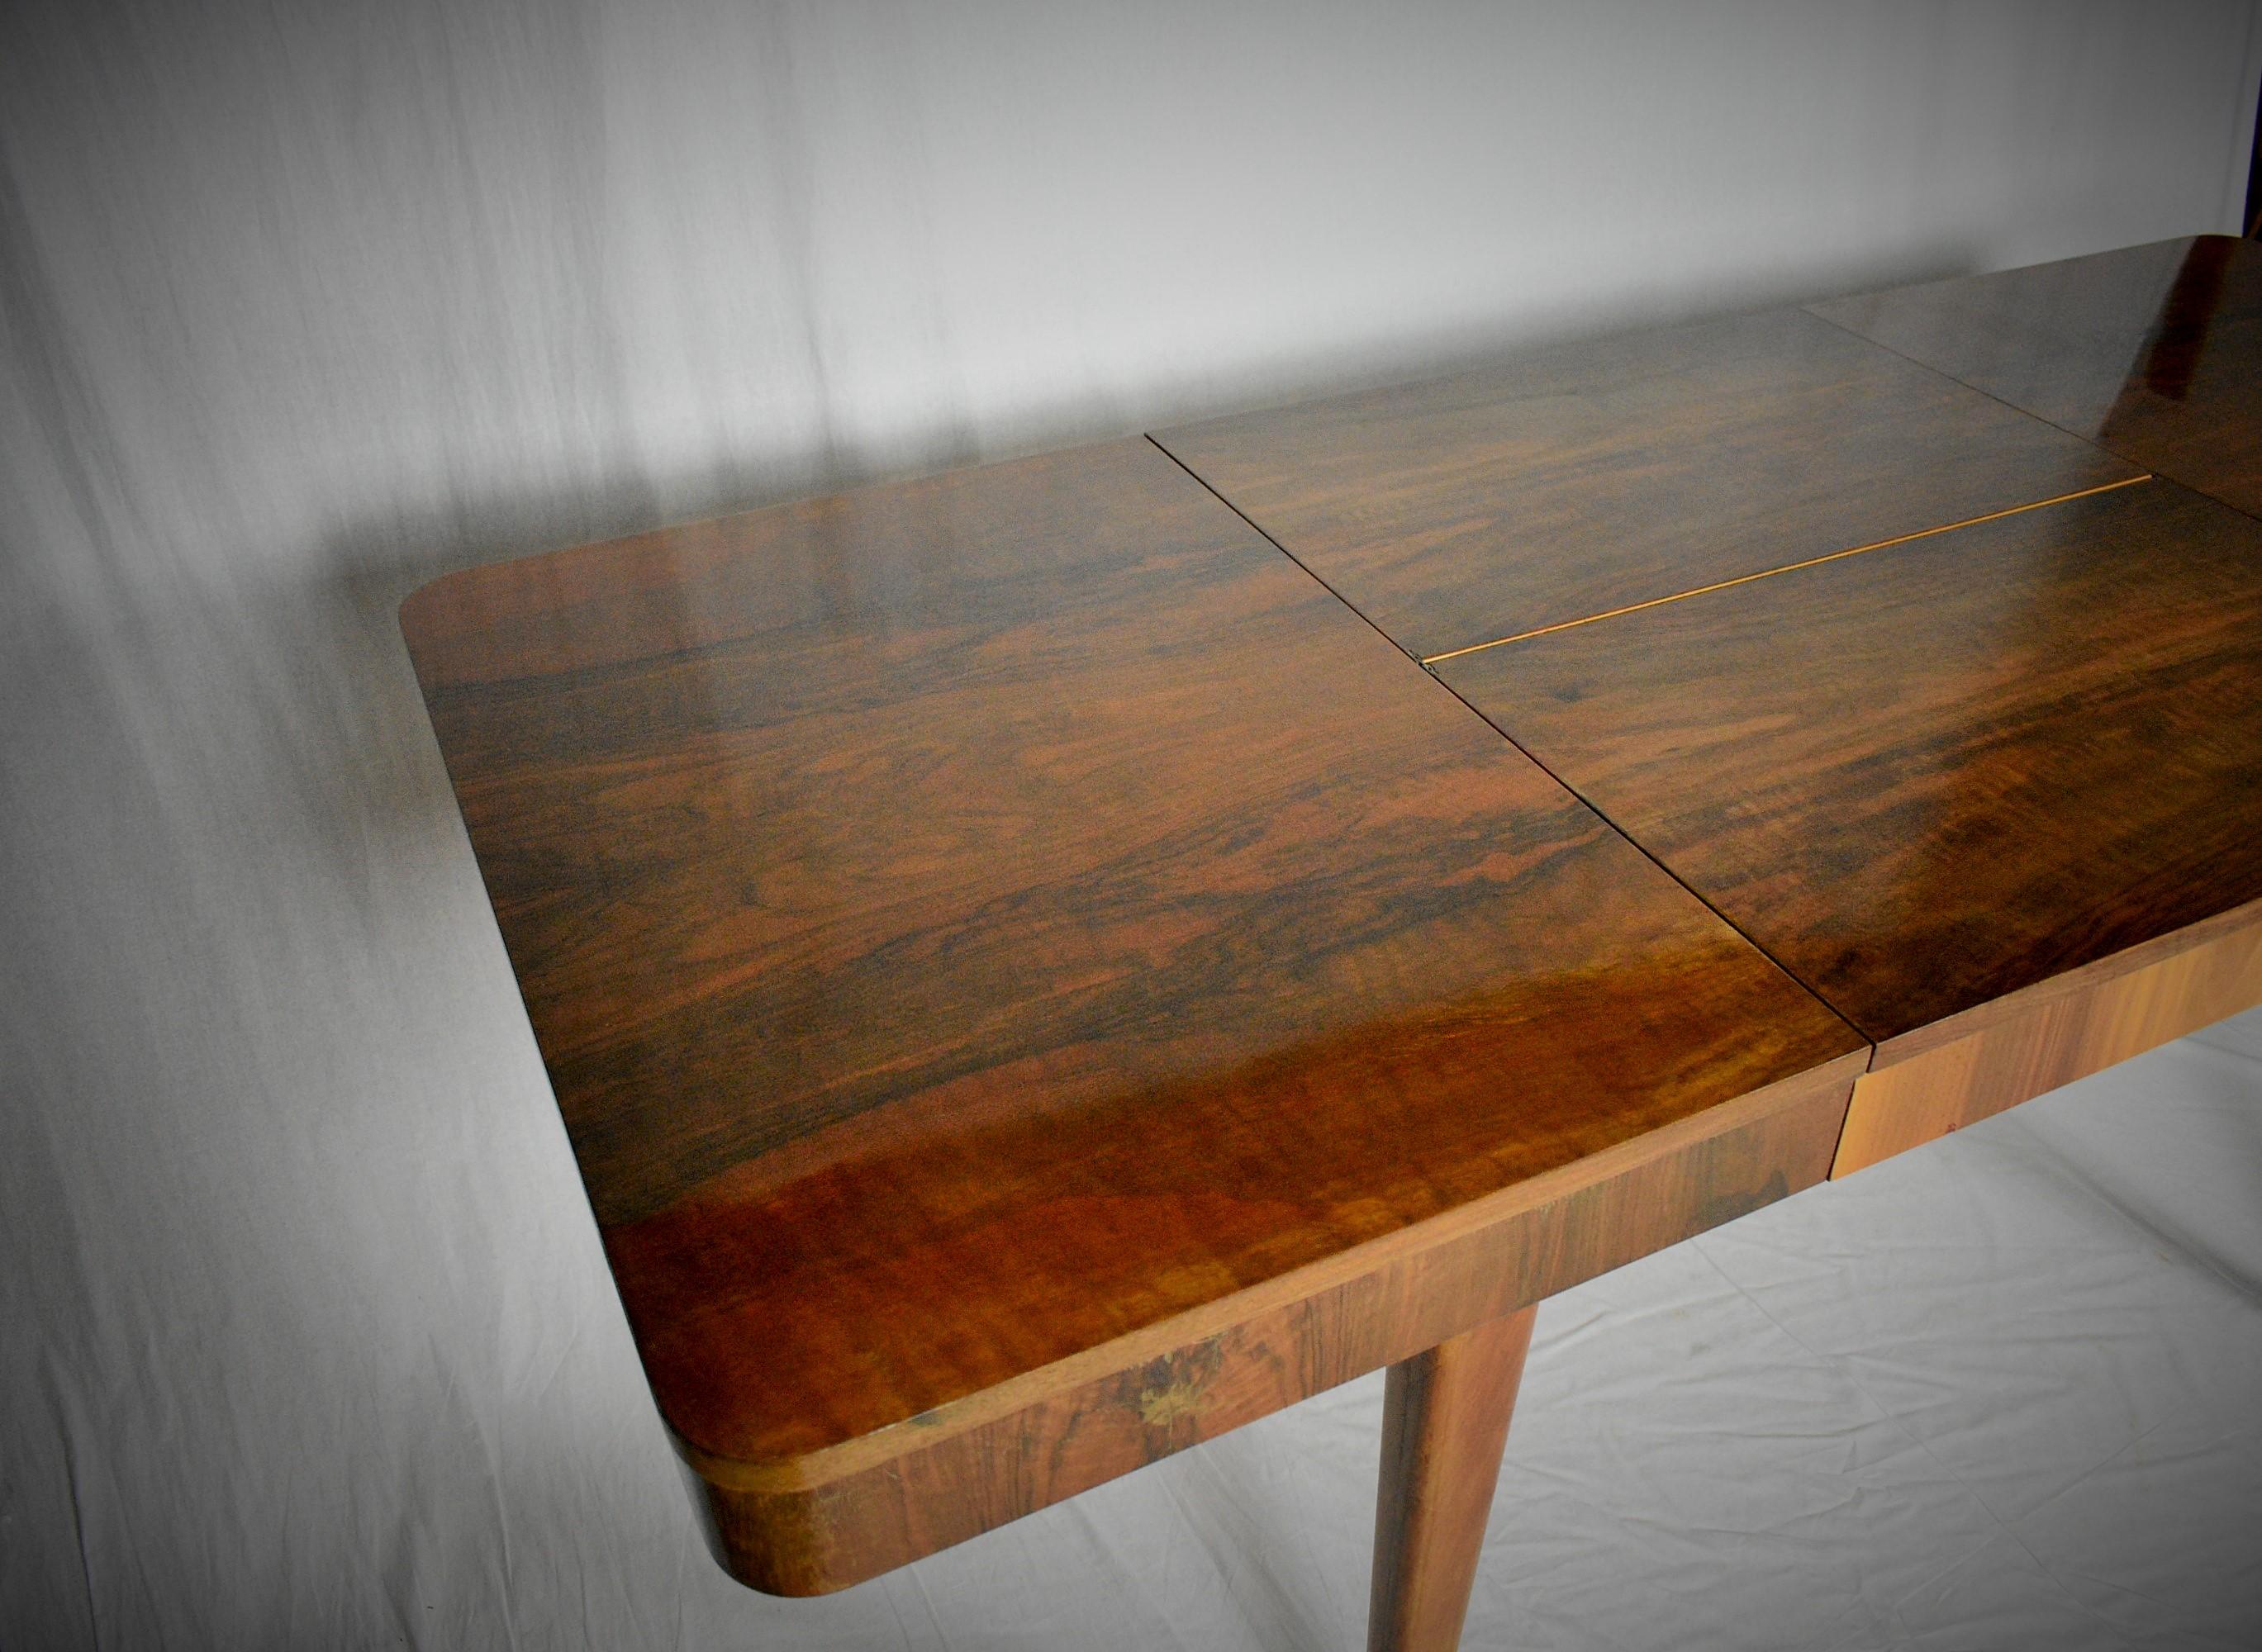 - Made in Czechoslovakia
- Made of wood
- Dimension of extending width 193 cm
- Good condition.
- The table is stabil
- Cleaned.